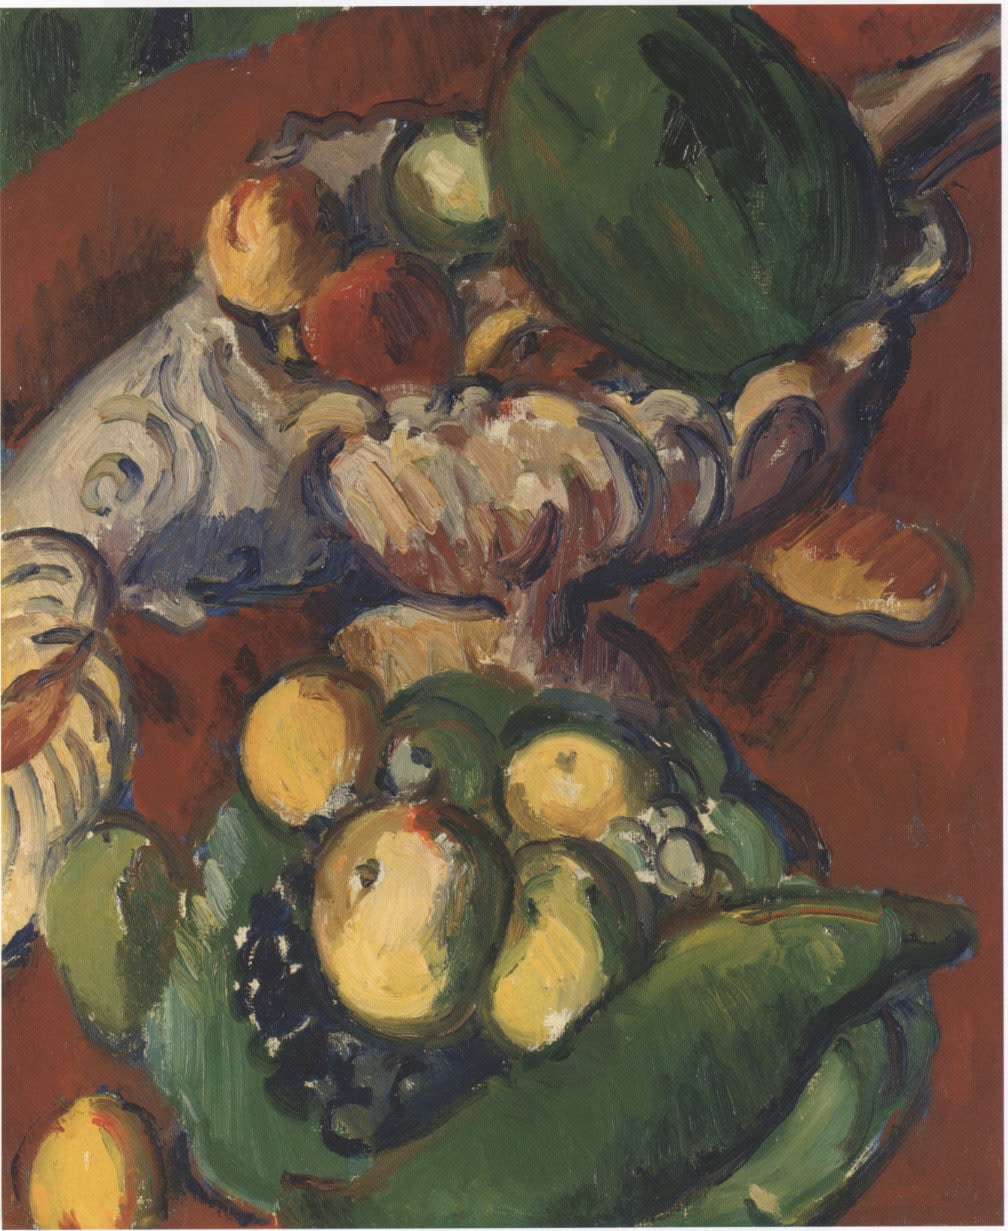 SIR MATTHEW SMITH, Still Life with Melon II, painted in 1950